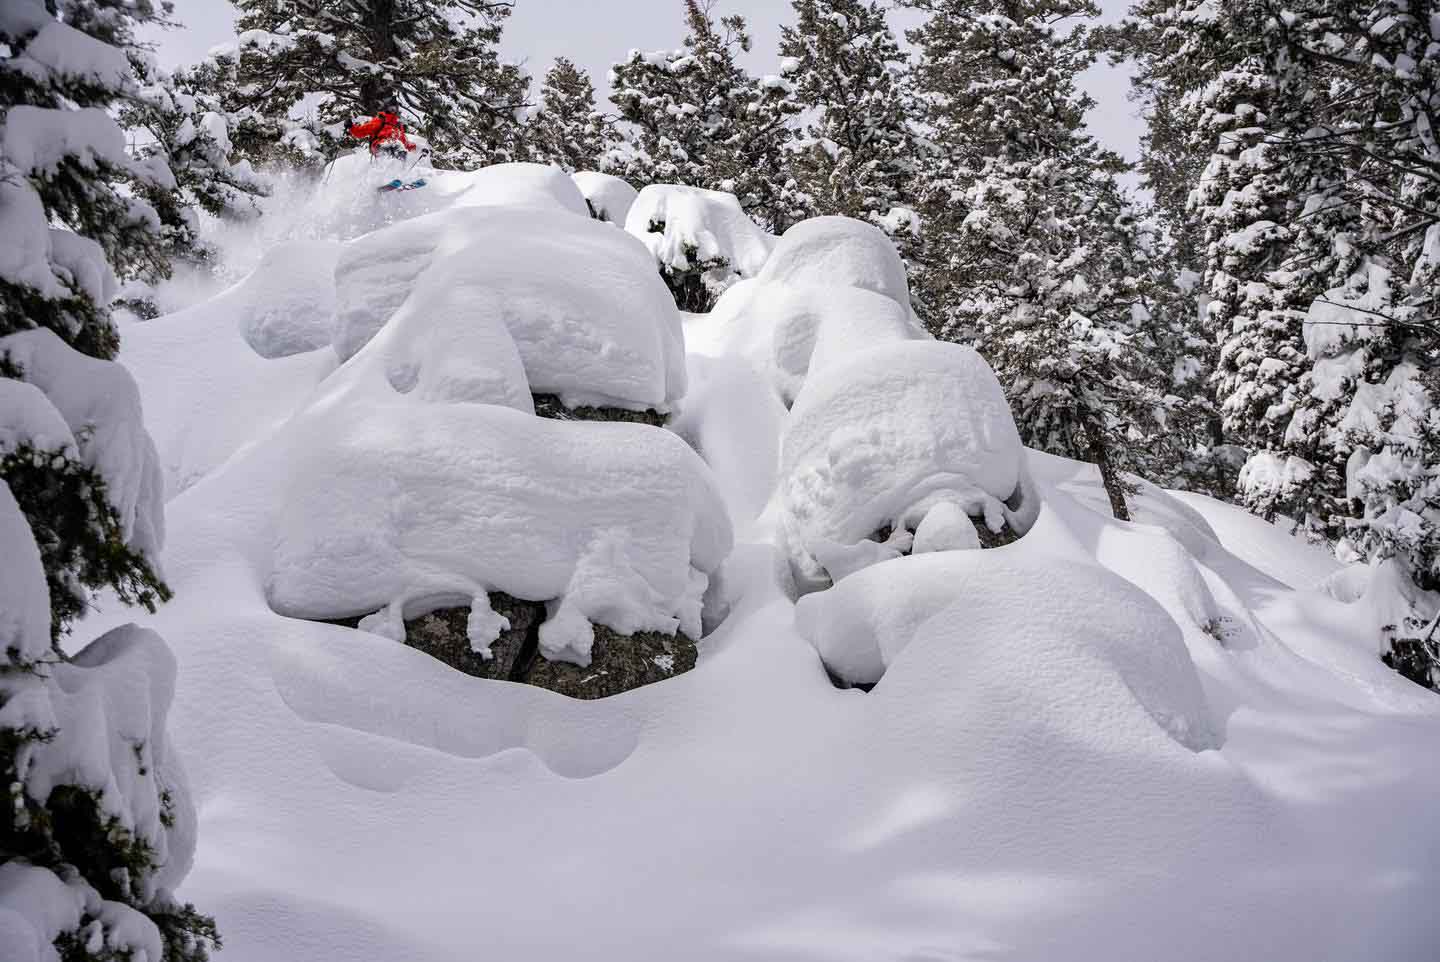 huge snow depth shown piled up on a cliffy rock section, with a skier in red, tiny, against the big drops they're making